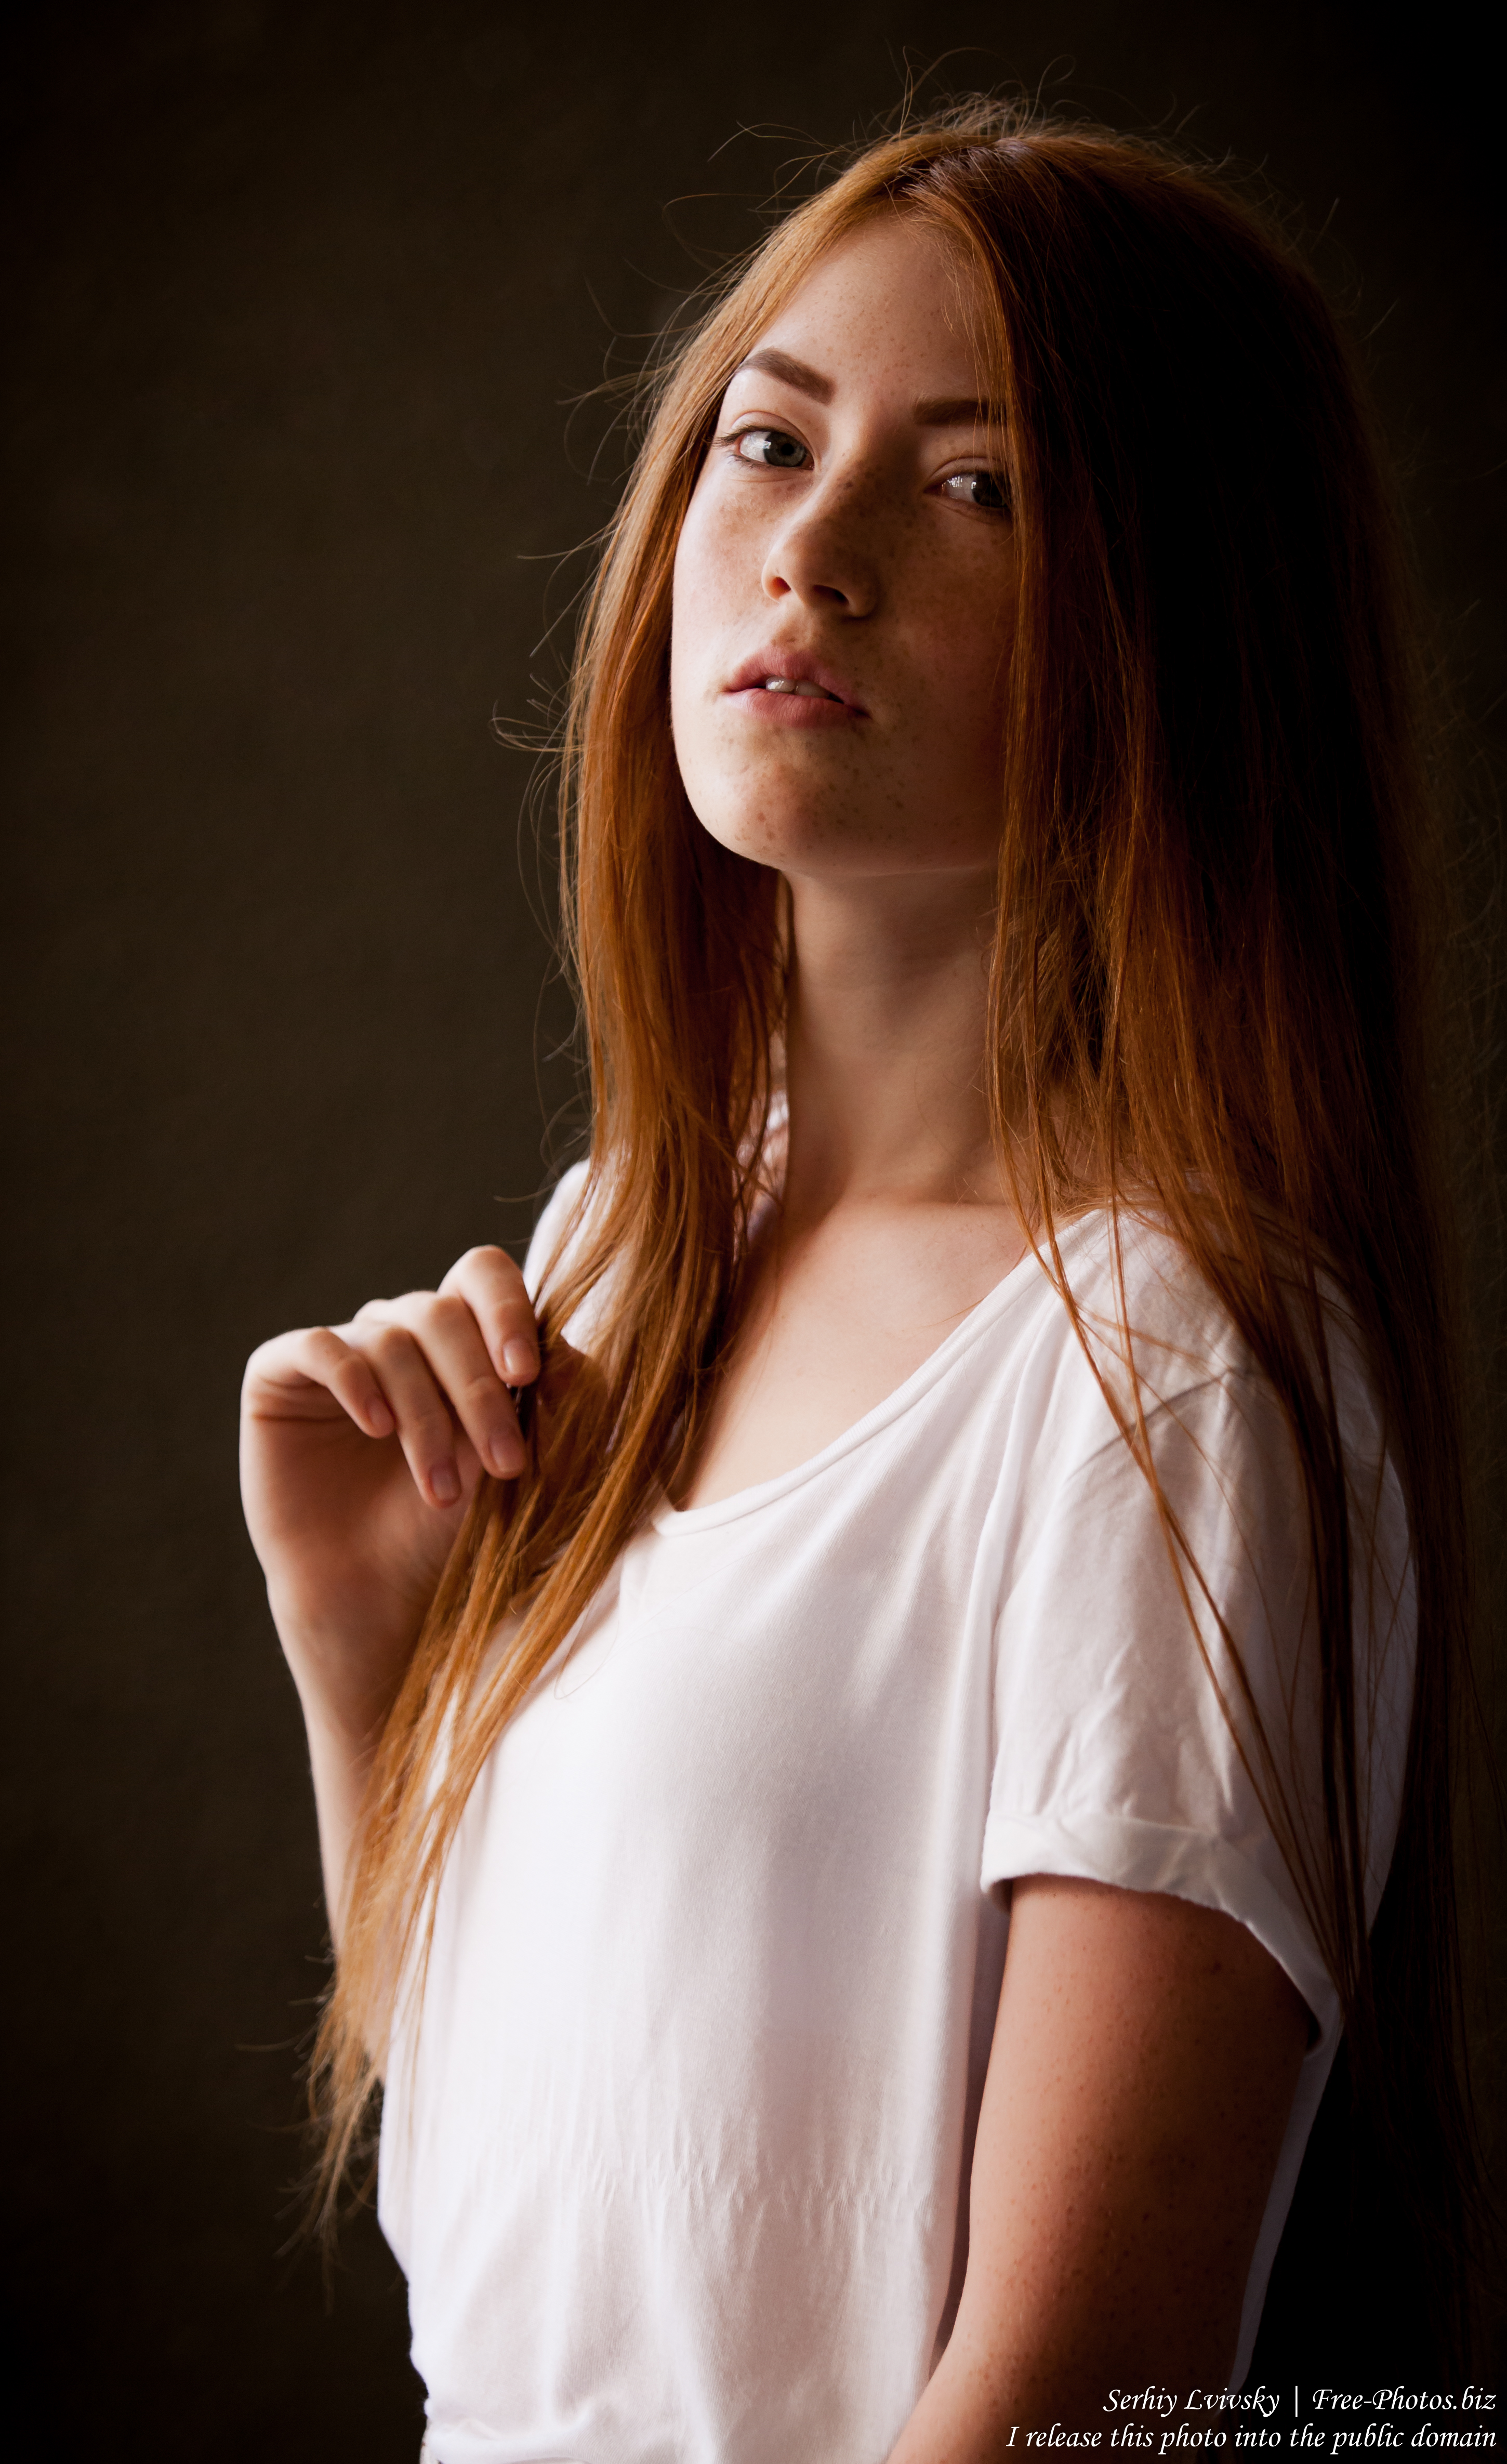 Photo Of A 15 Year Old Red Haired Catholic Girl Photographed By Serhiy